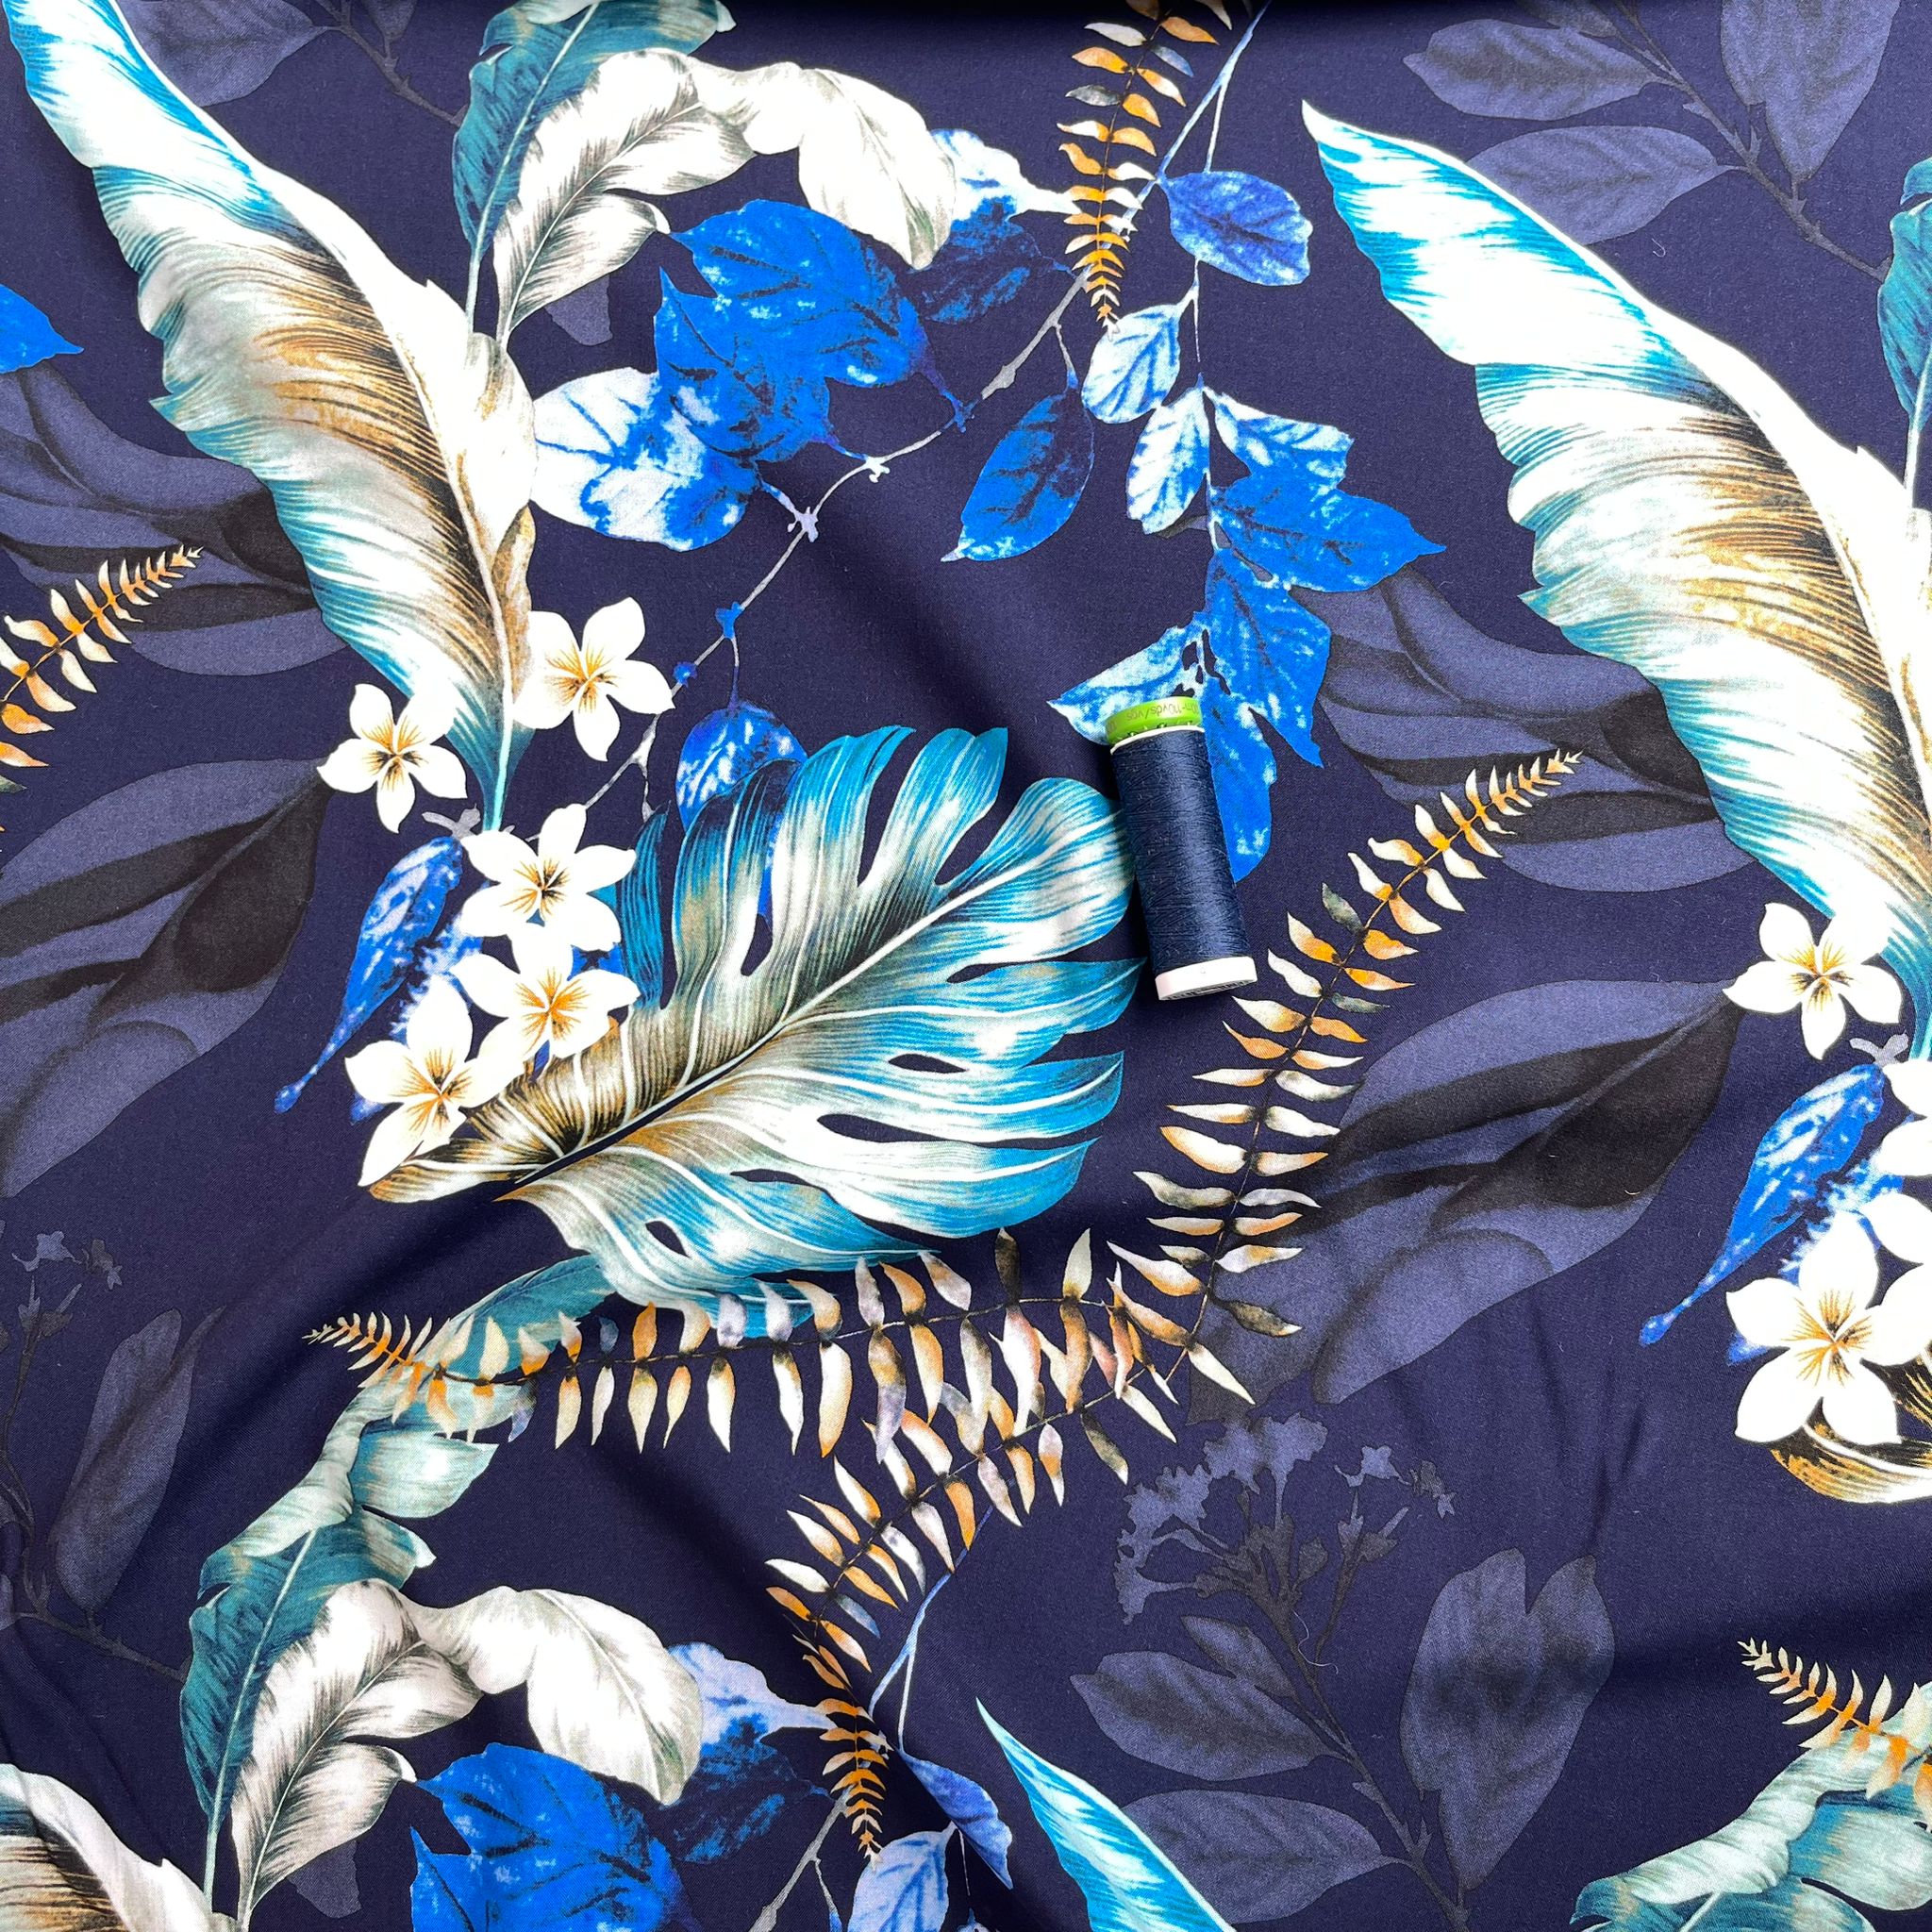 Tropical Turquoise Leaves on Navy Viscose Poplin Fabric